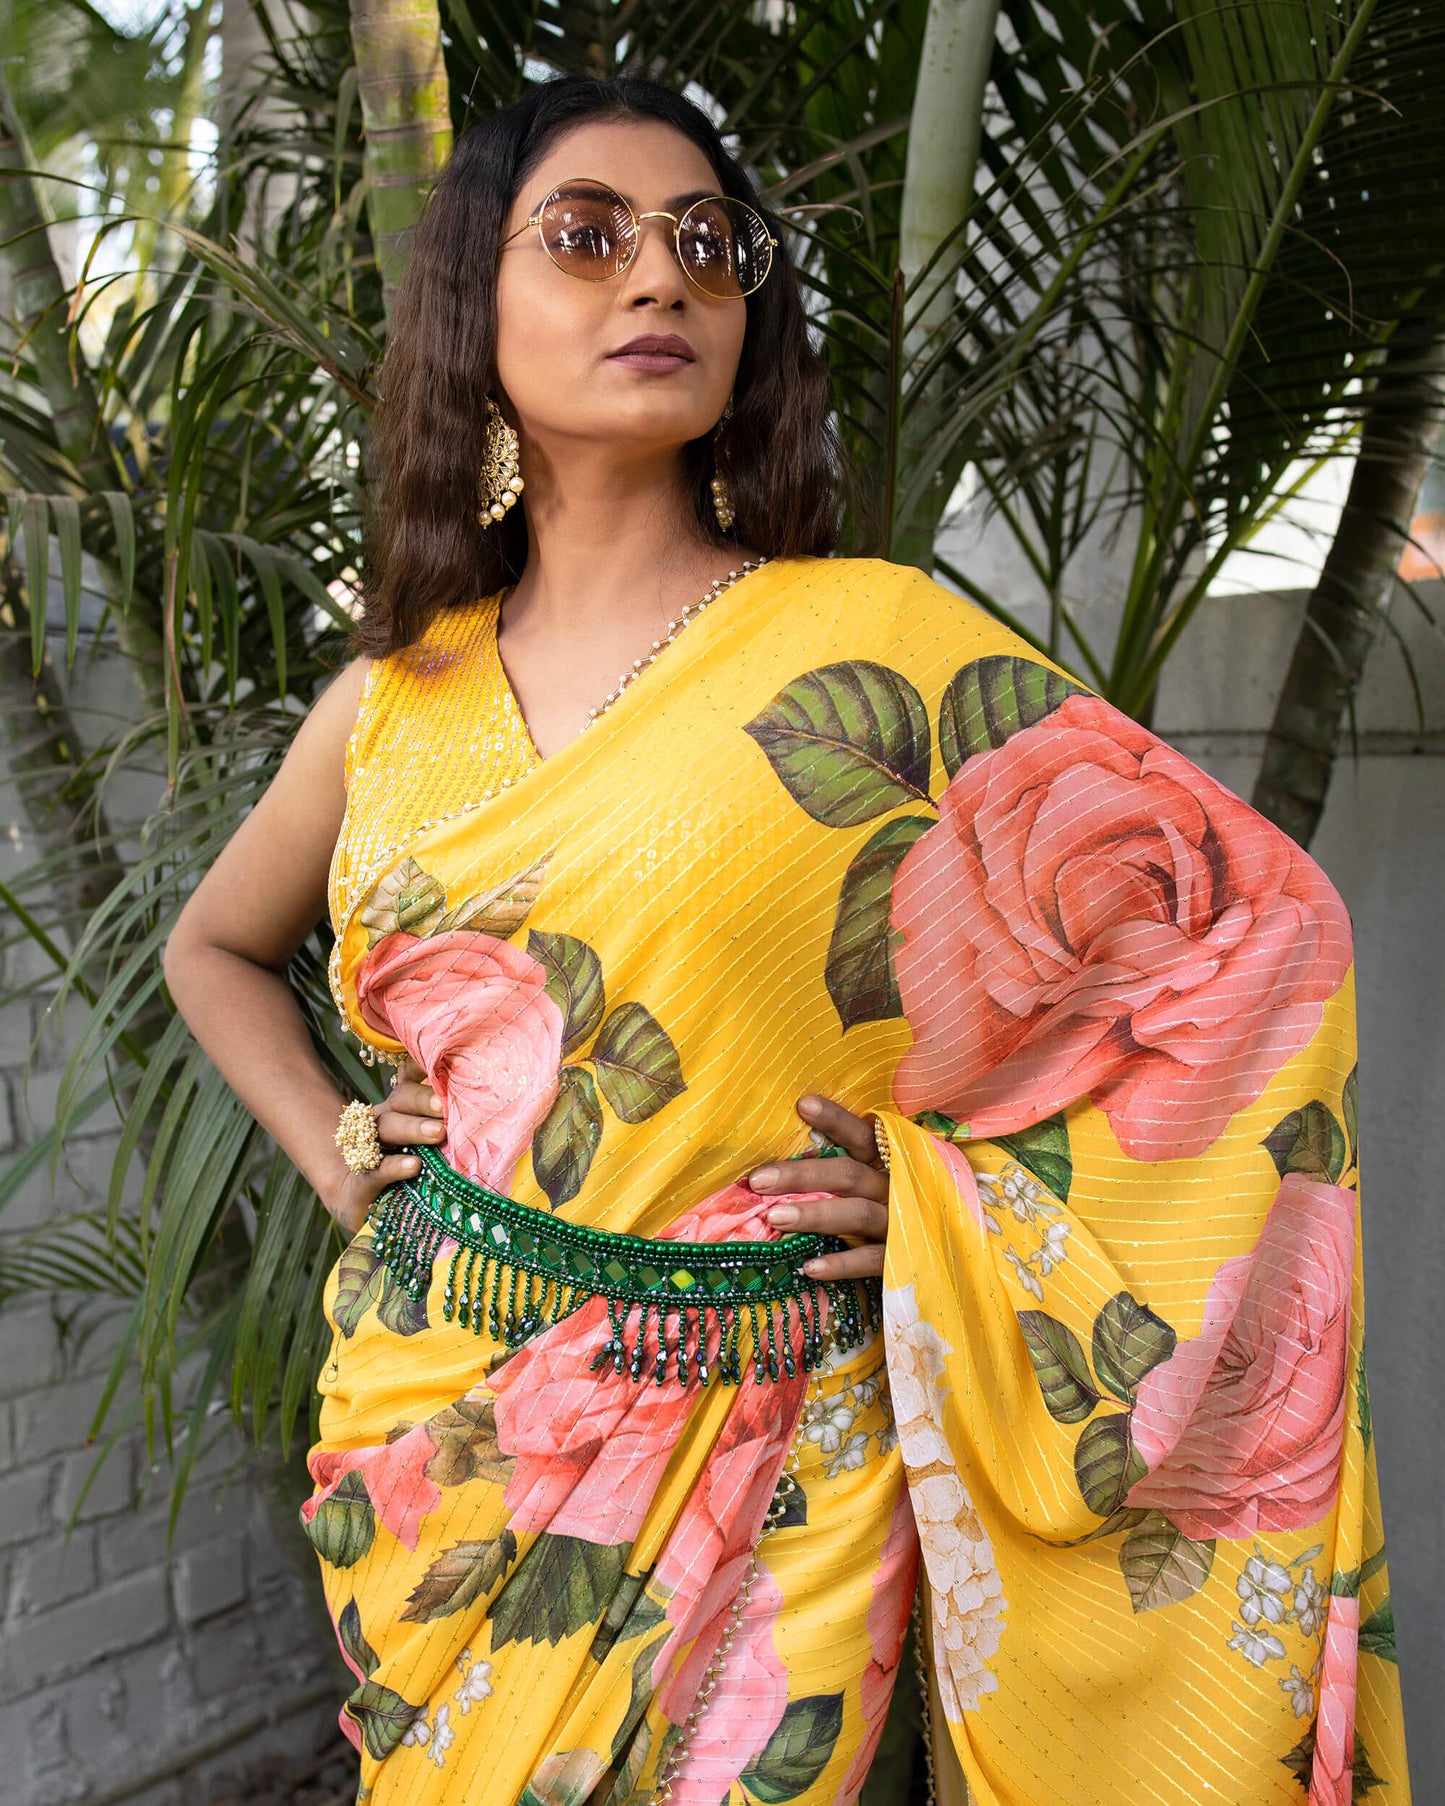 Bumblebee Yellow And Pink Floral Pattren Sequins Georgette Pre-Draped Saree With Tubular Beads Pearl Work Lace Border